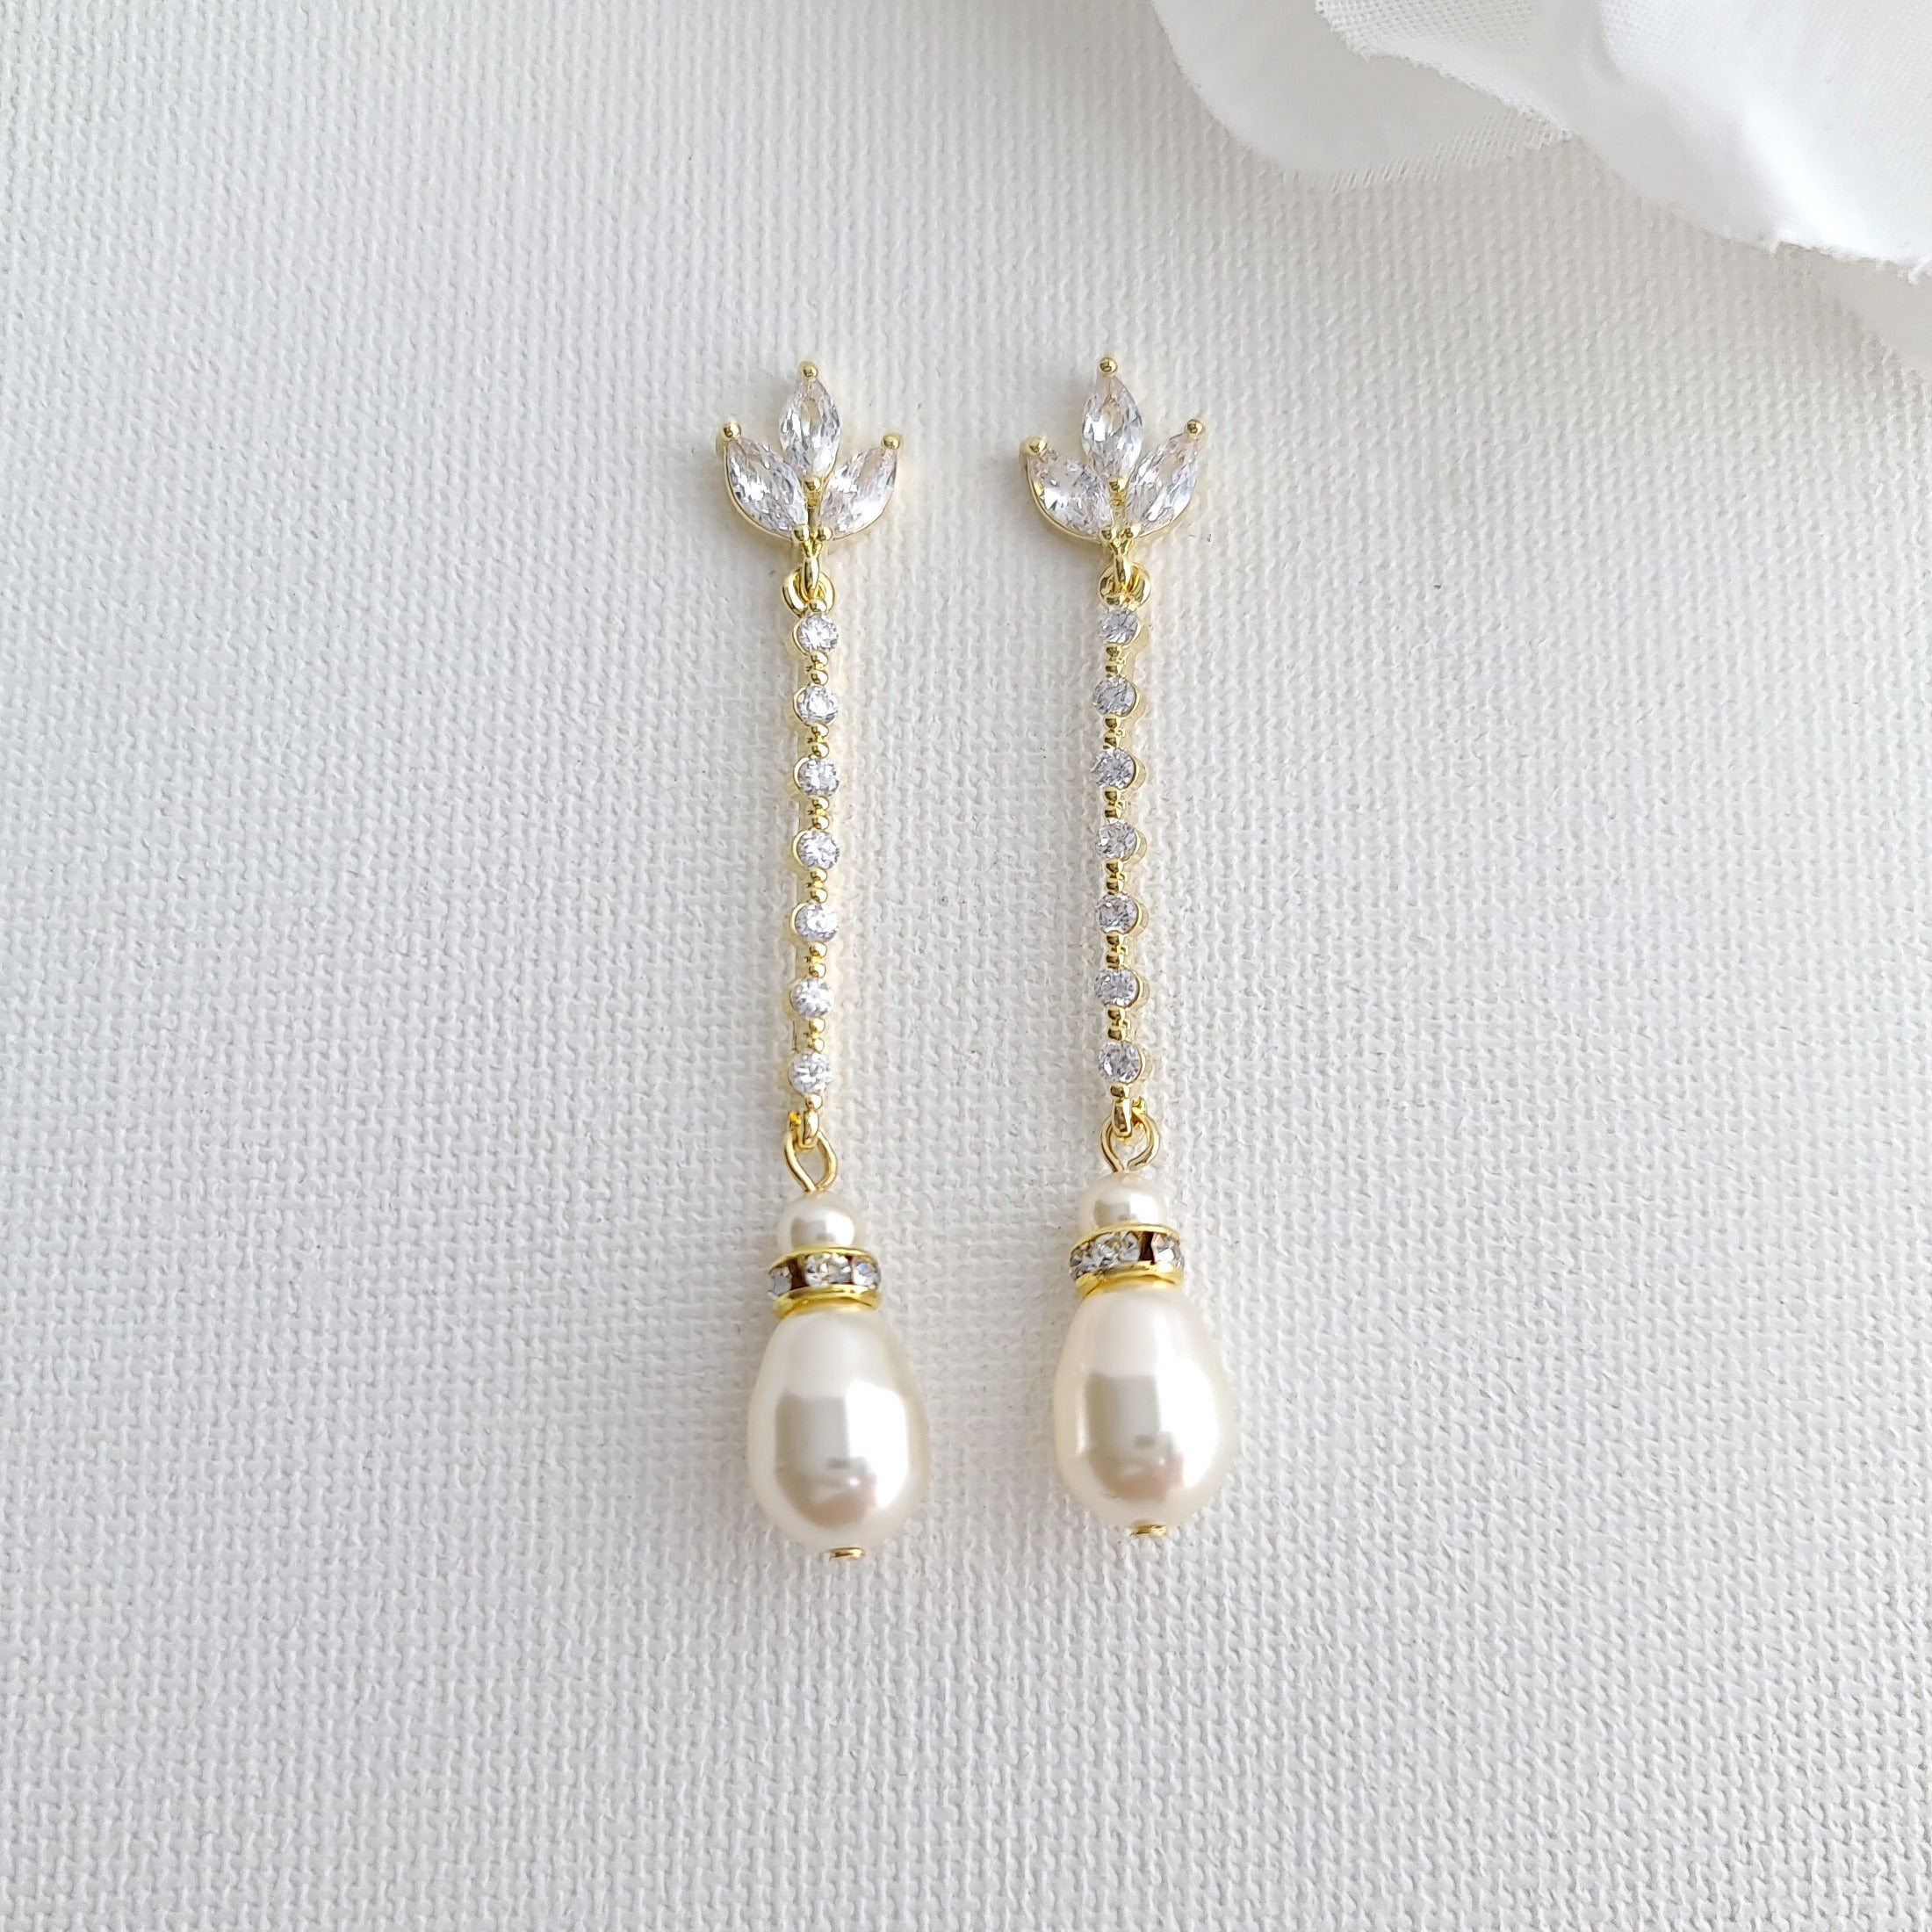 22K gold earrings with pearls